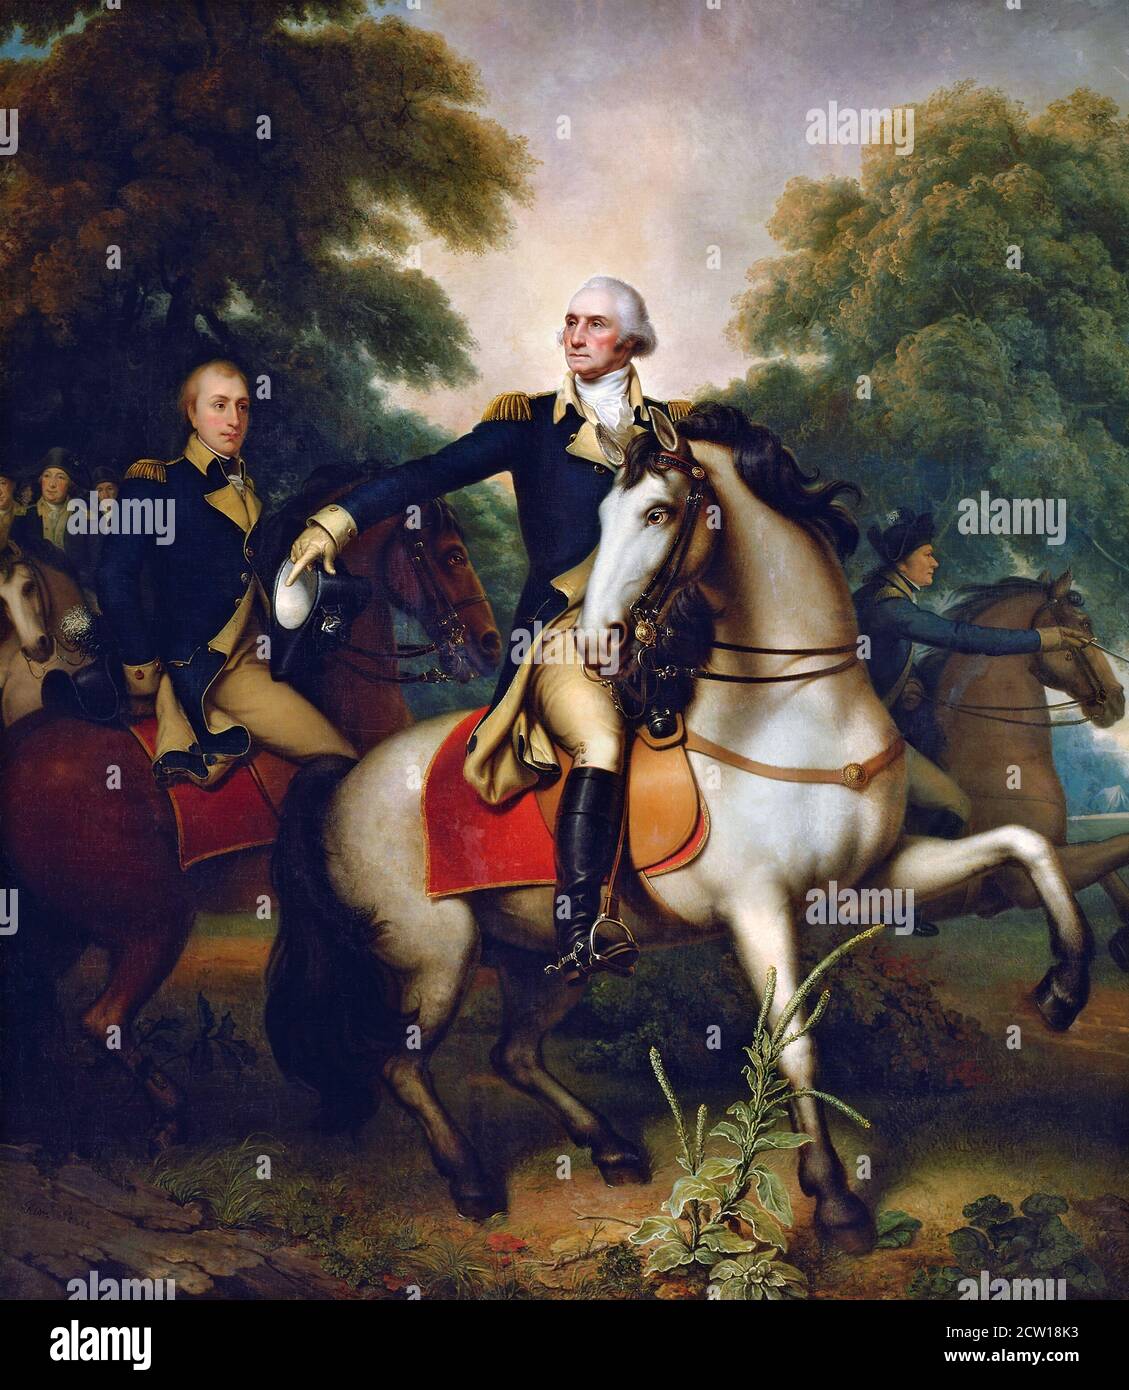 General George Washingon. Painting entitled 'Washington before Yorktown' by Rembrandt Peale, oil on canvas, 1824, reworked in 1825. Stock Photo